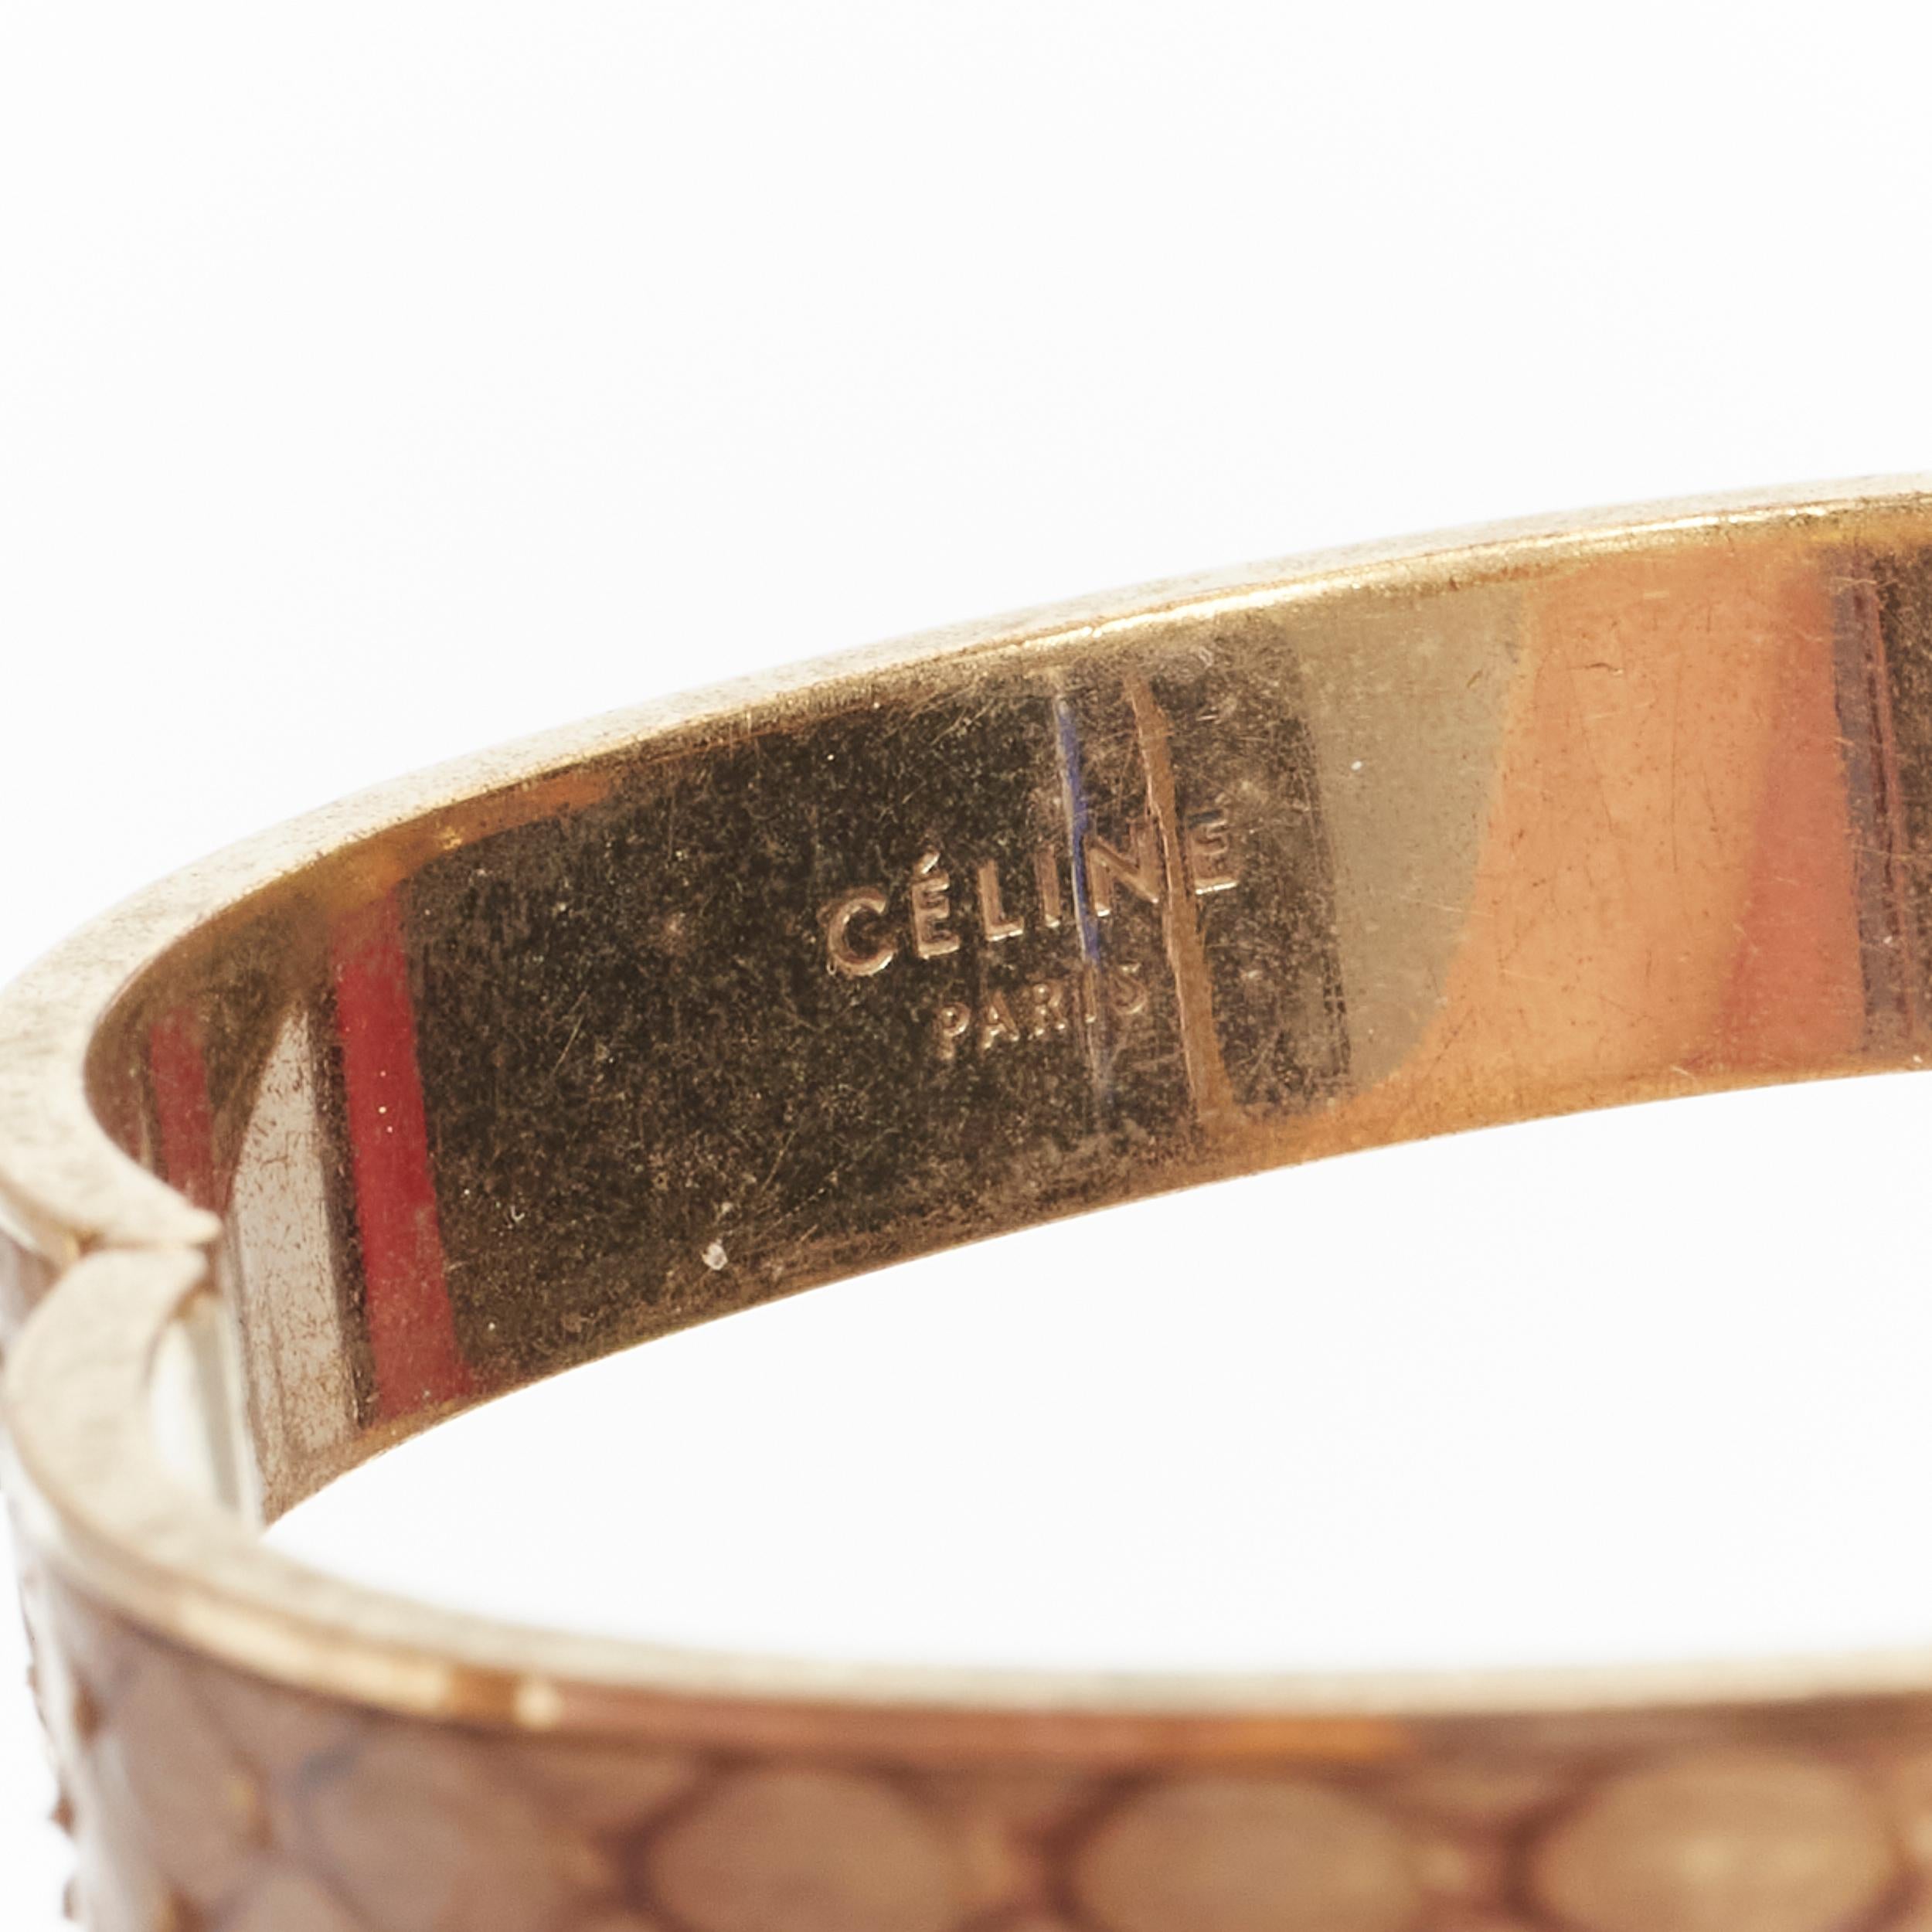 Women's OLD CELINE Phoebe Philo Manchette natural scaled leather gold metal cuff bangle